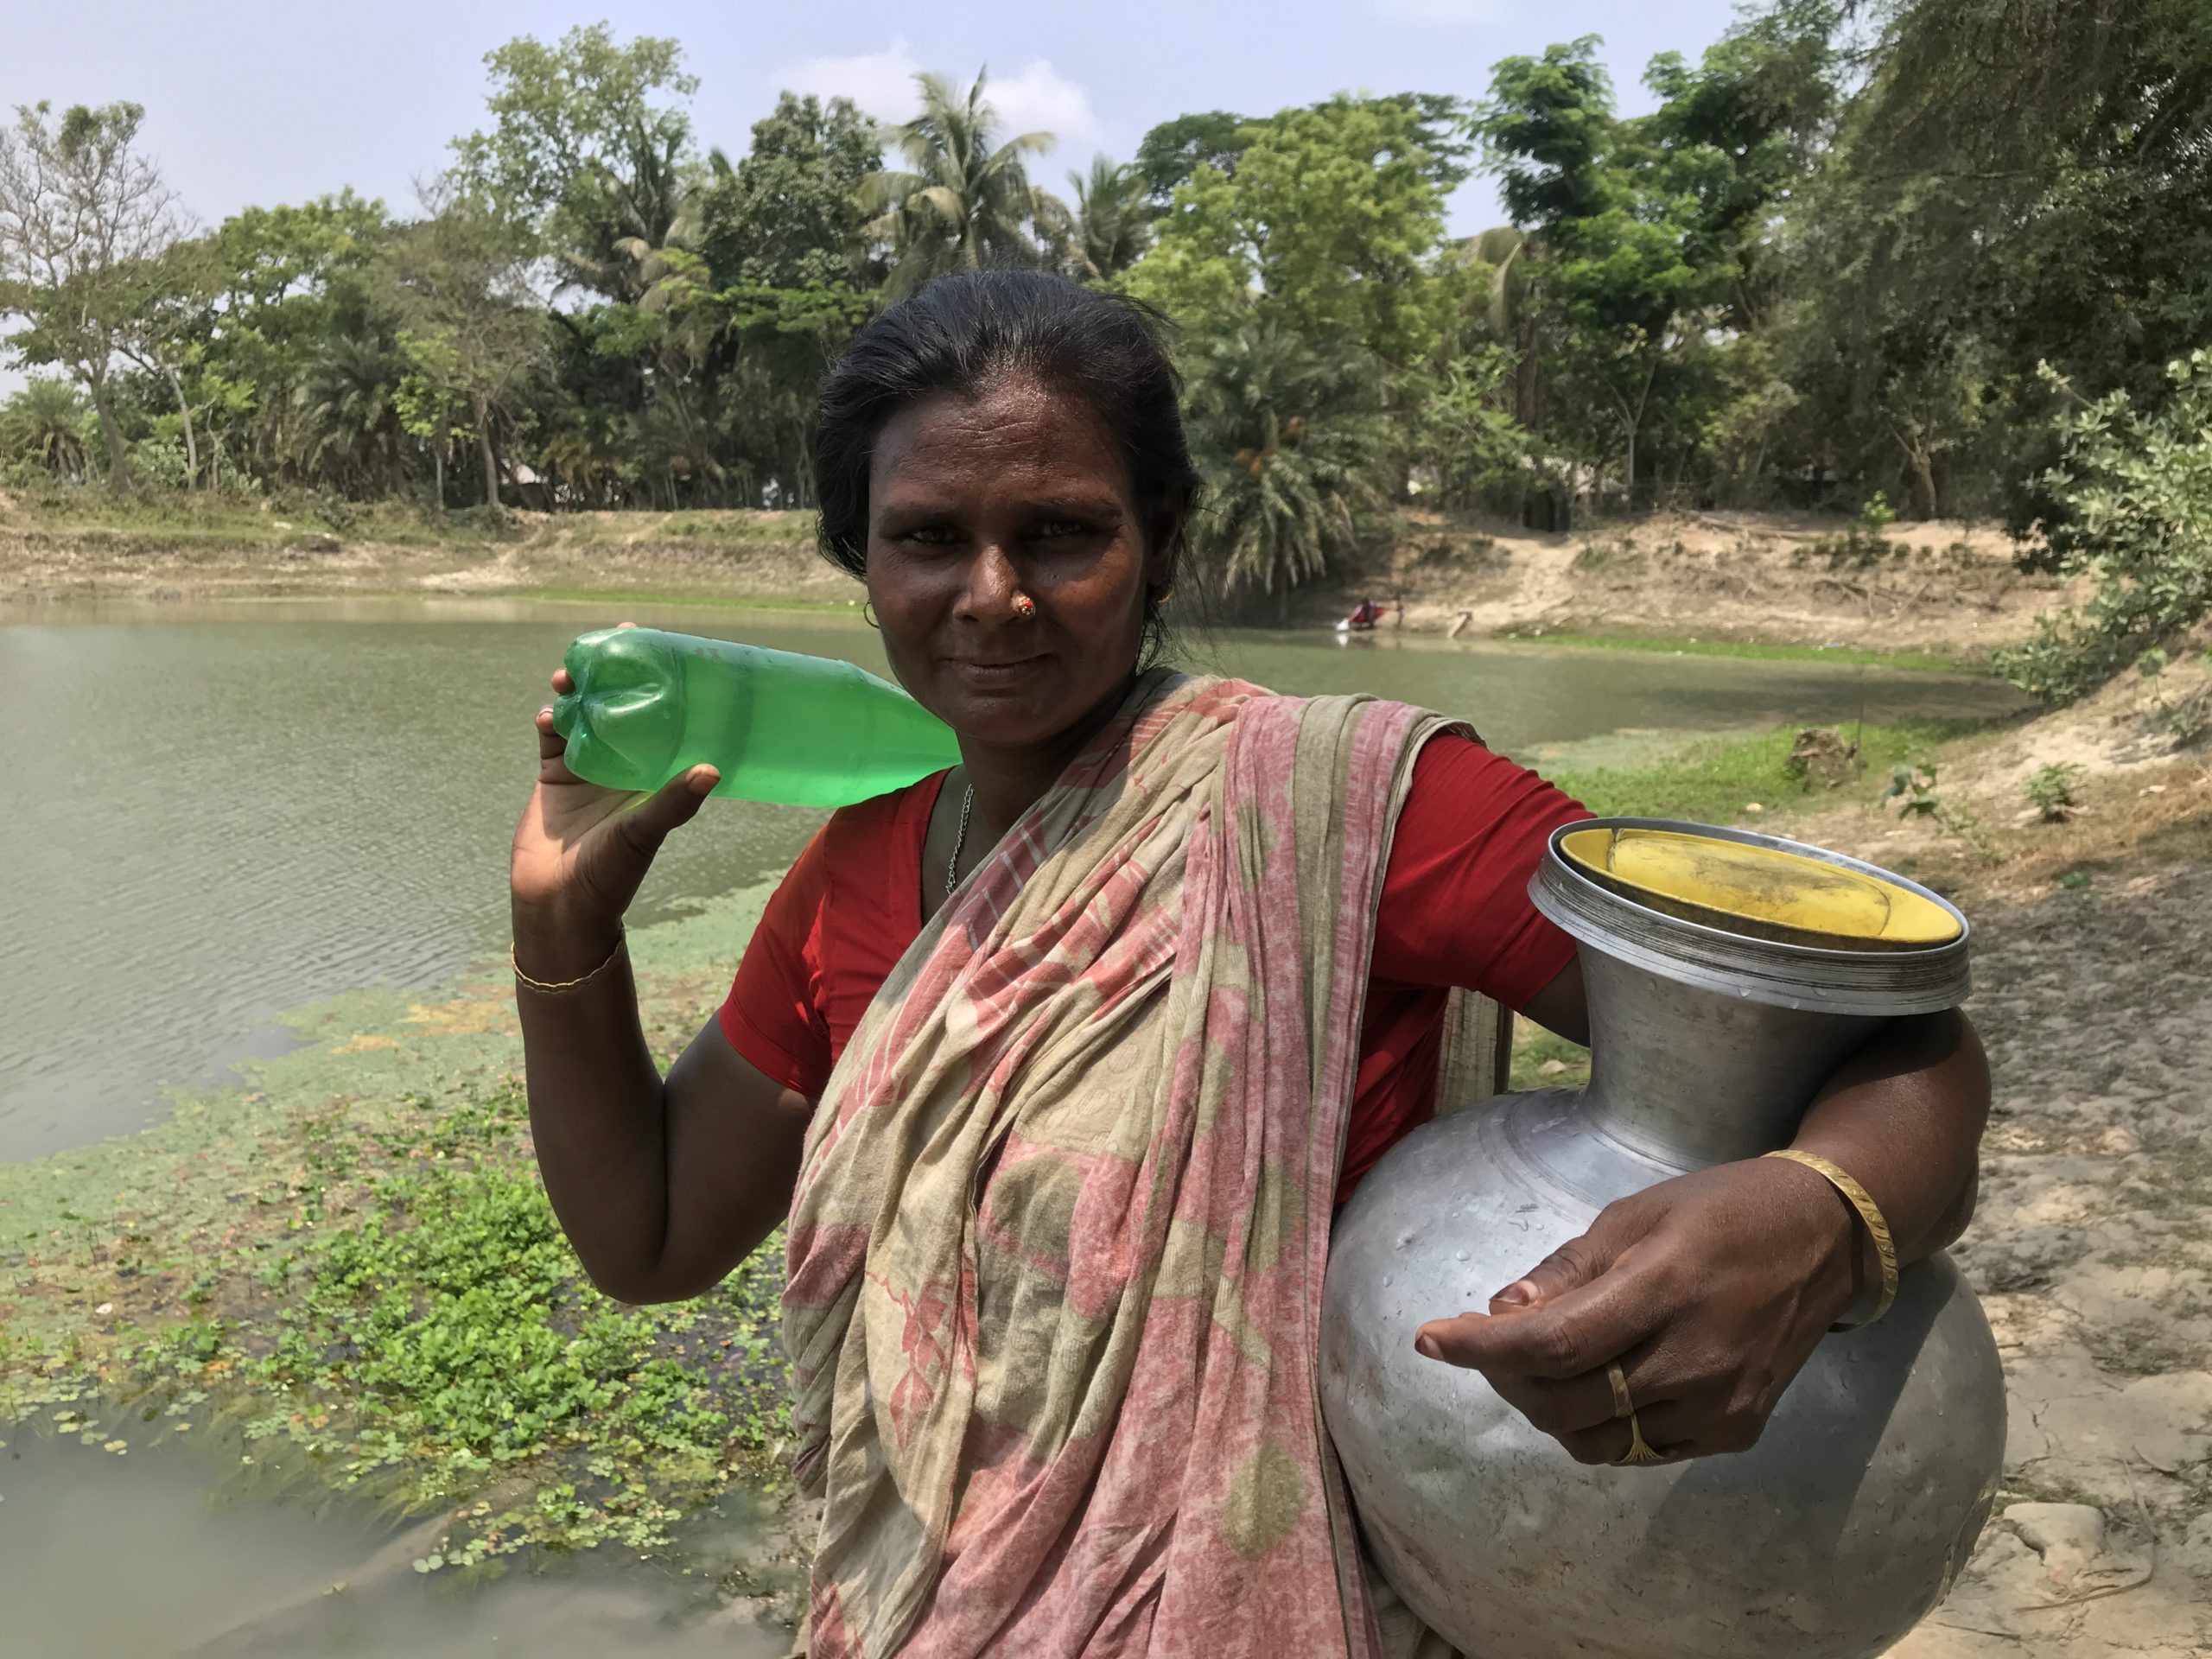 Shefali Biswas is returning home after collecting water from a pond